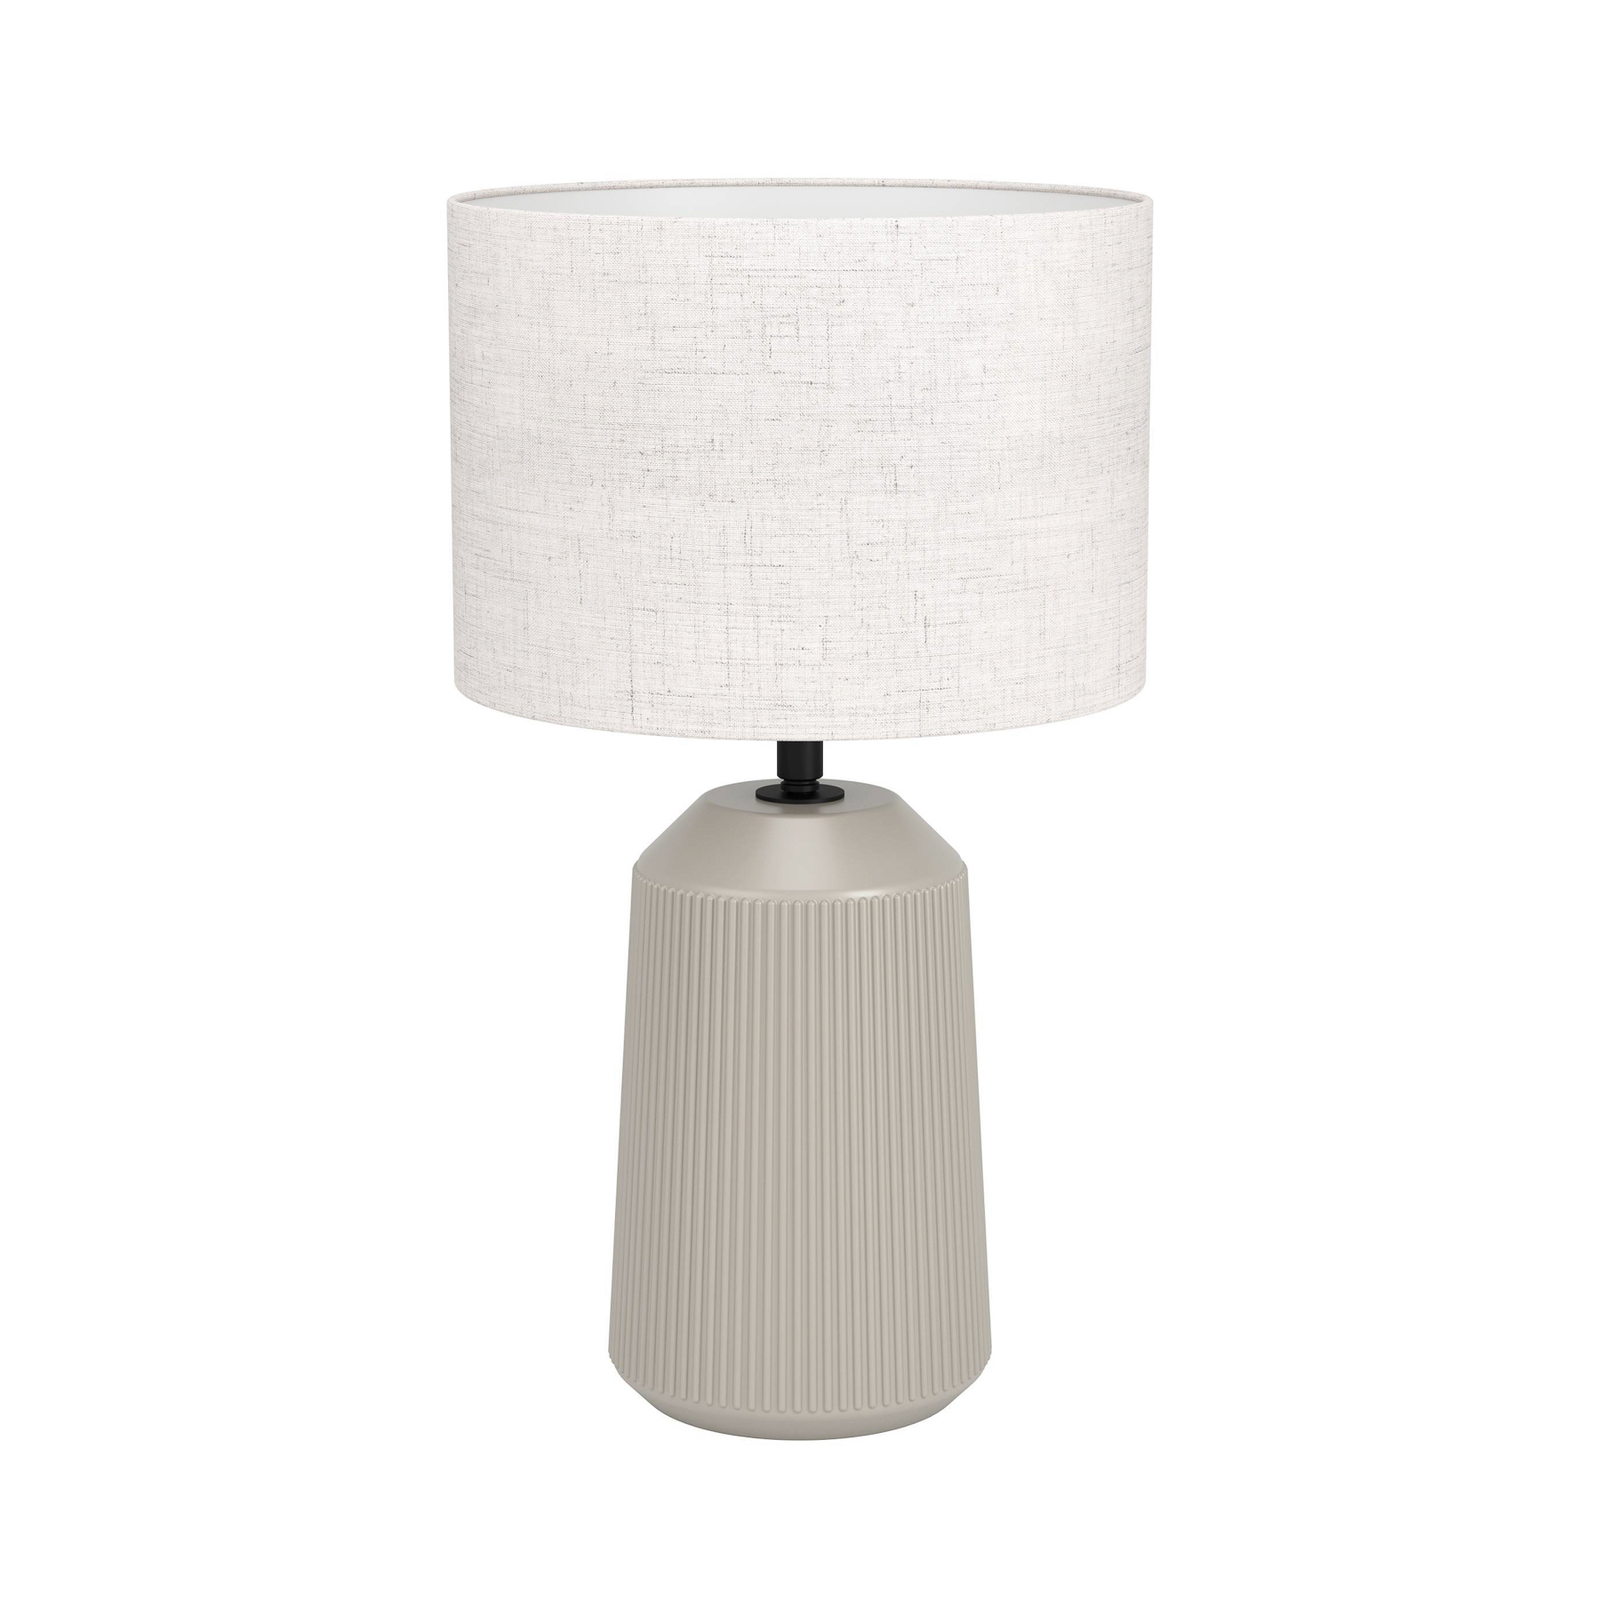 Capalbio table lamp, sand base/white lampshade